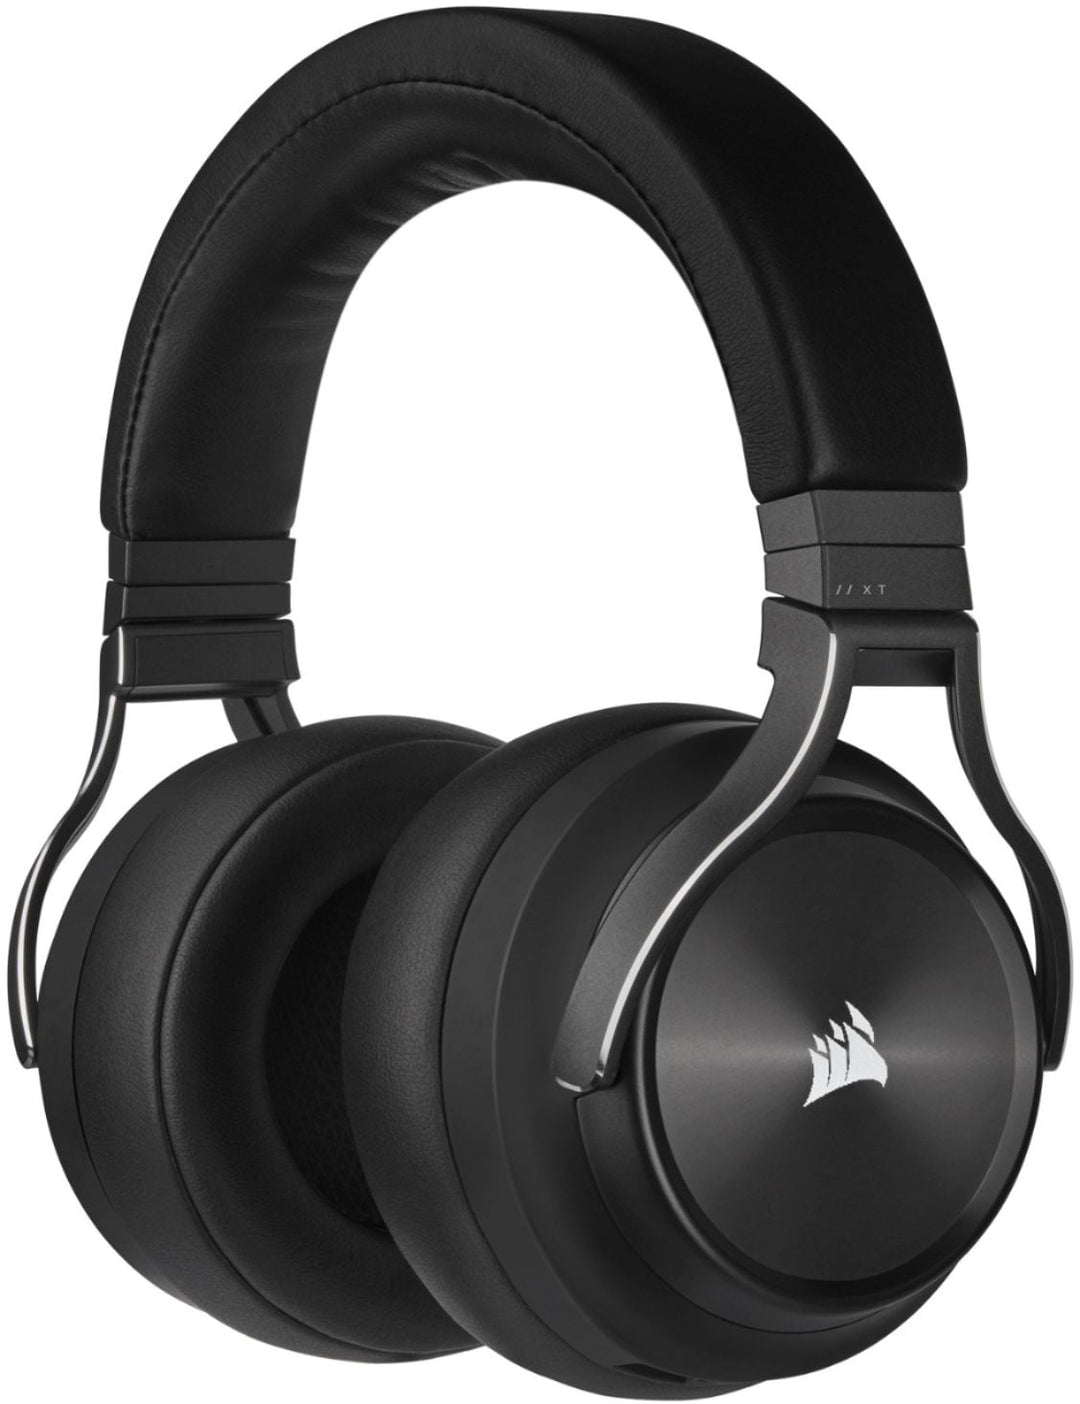 CORSAIR - VIRTUOSO RGB XT Wireless Dolby Atmos Gaming Headset for PC, Mac, PS5/PS4 with Bluetooth - Slate_3